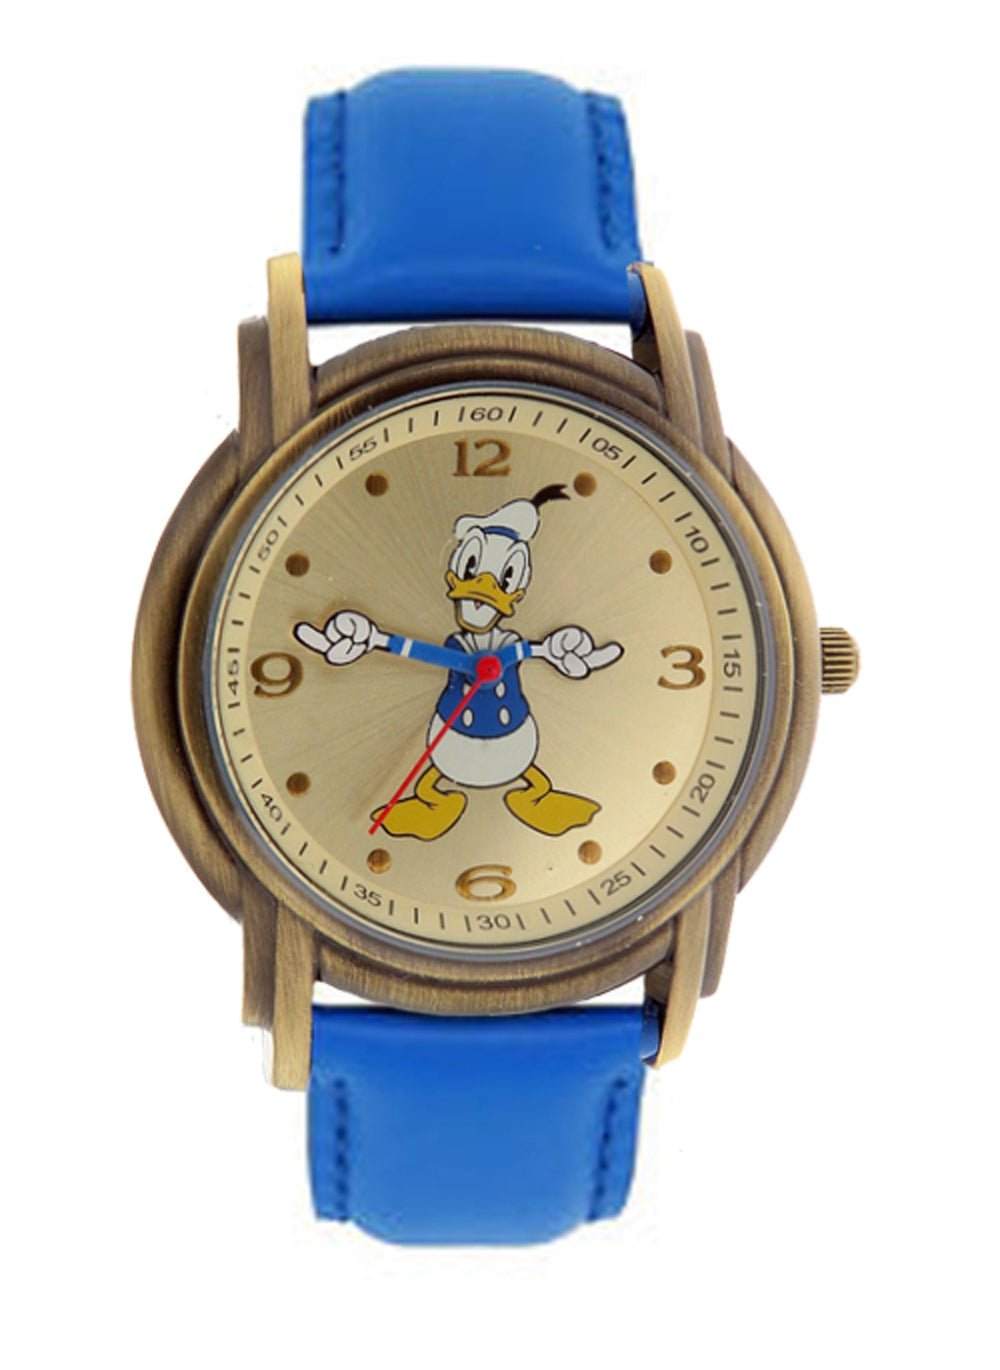 Model: Disney Donald Duck Unisex Gold Tone & Leather Classic Moving Hands Watch